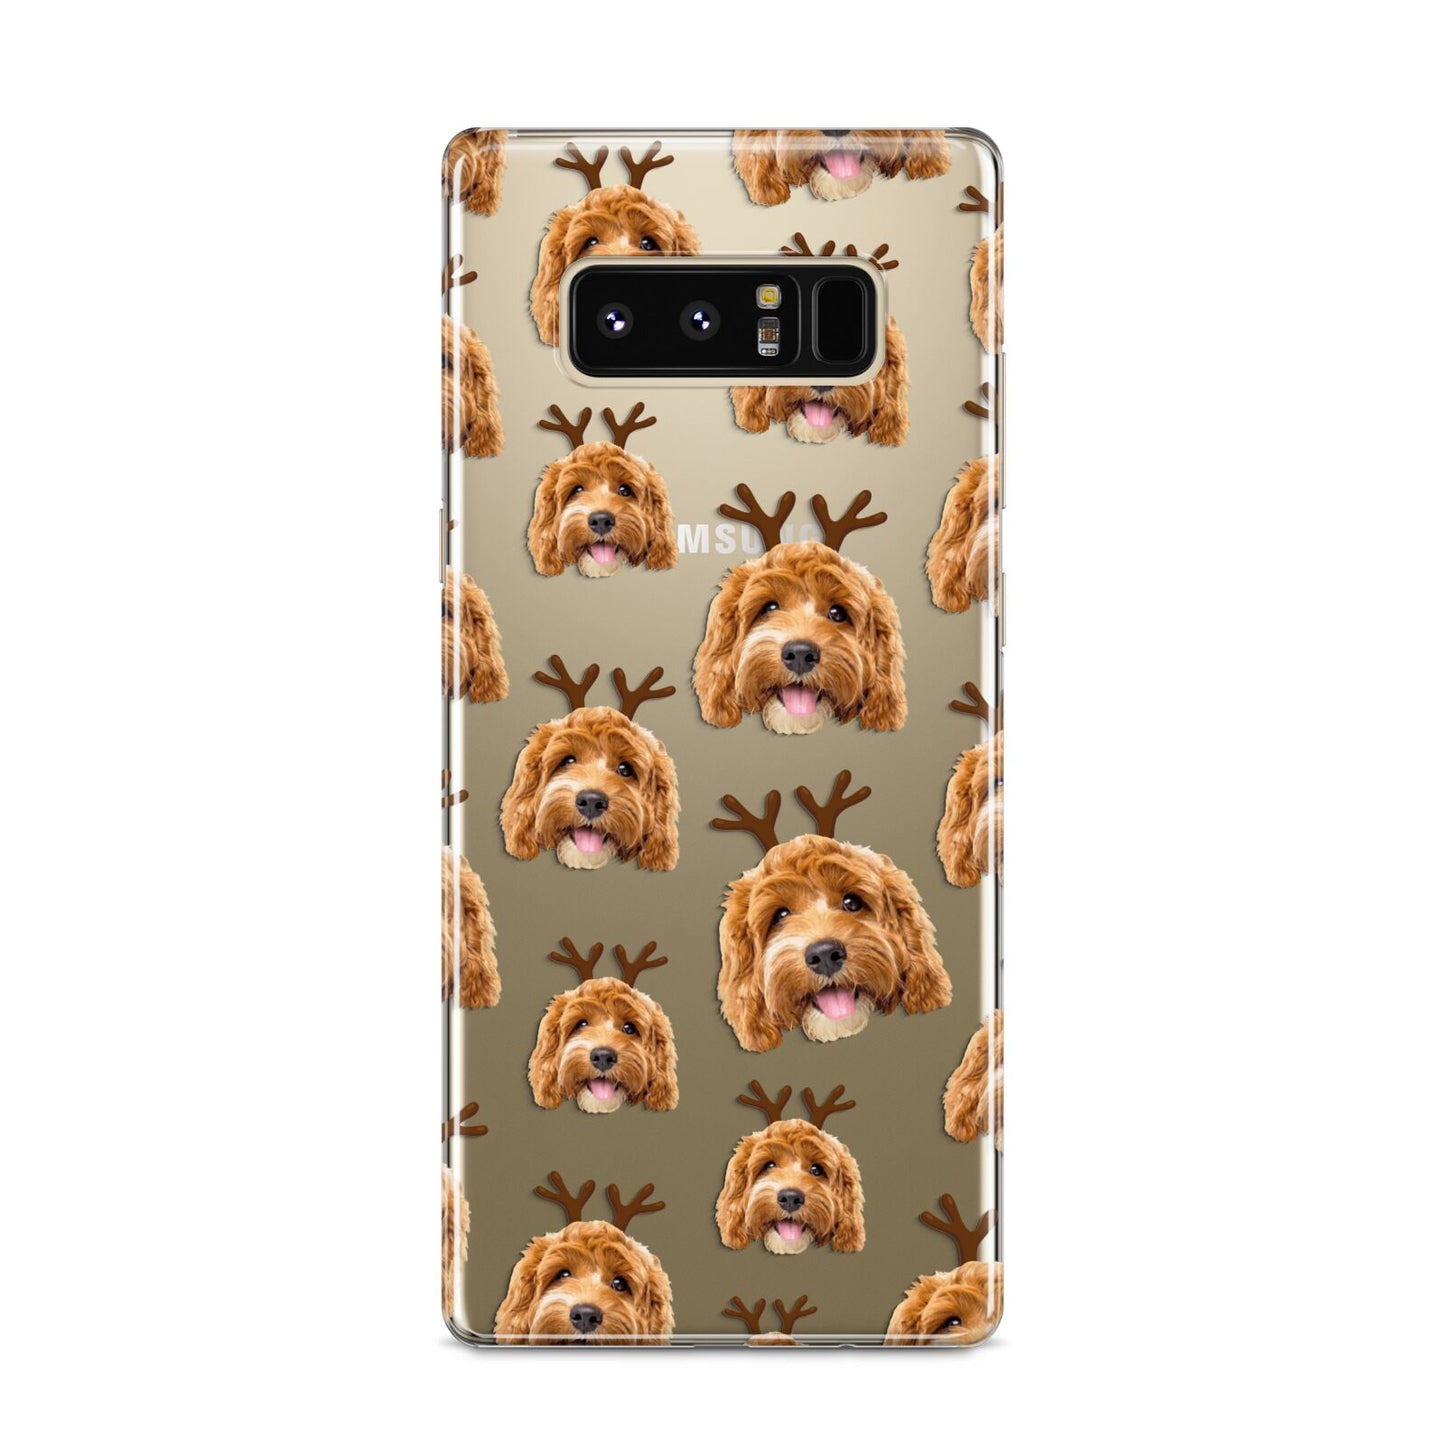 Personalised Christmas Dog Antler Samsung Galaxy S8 Case